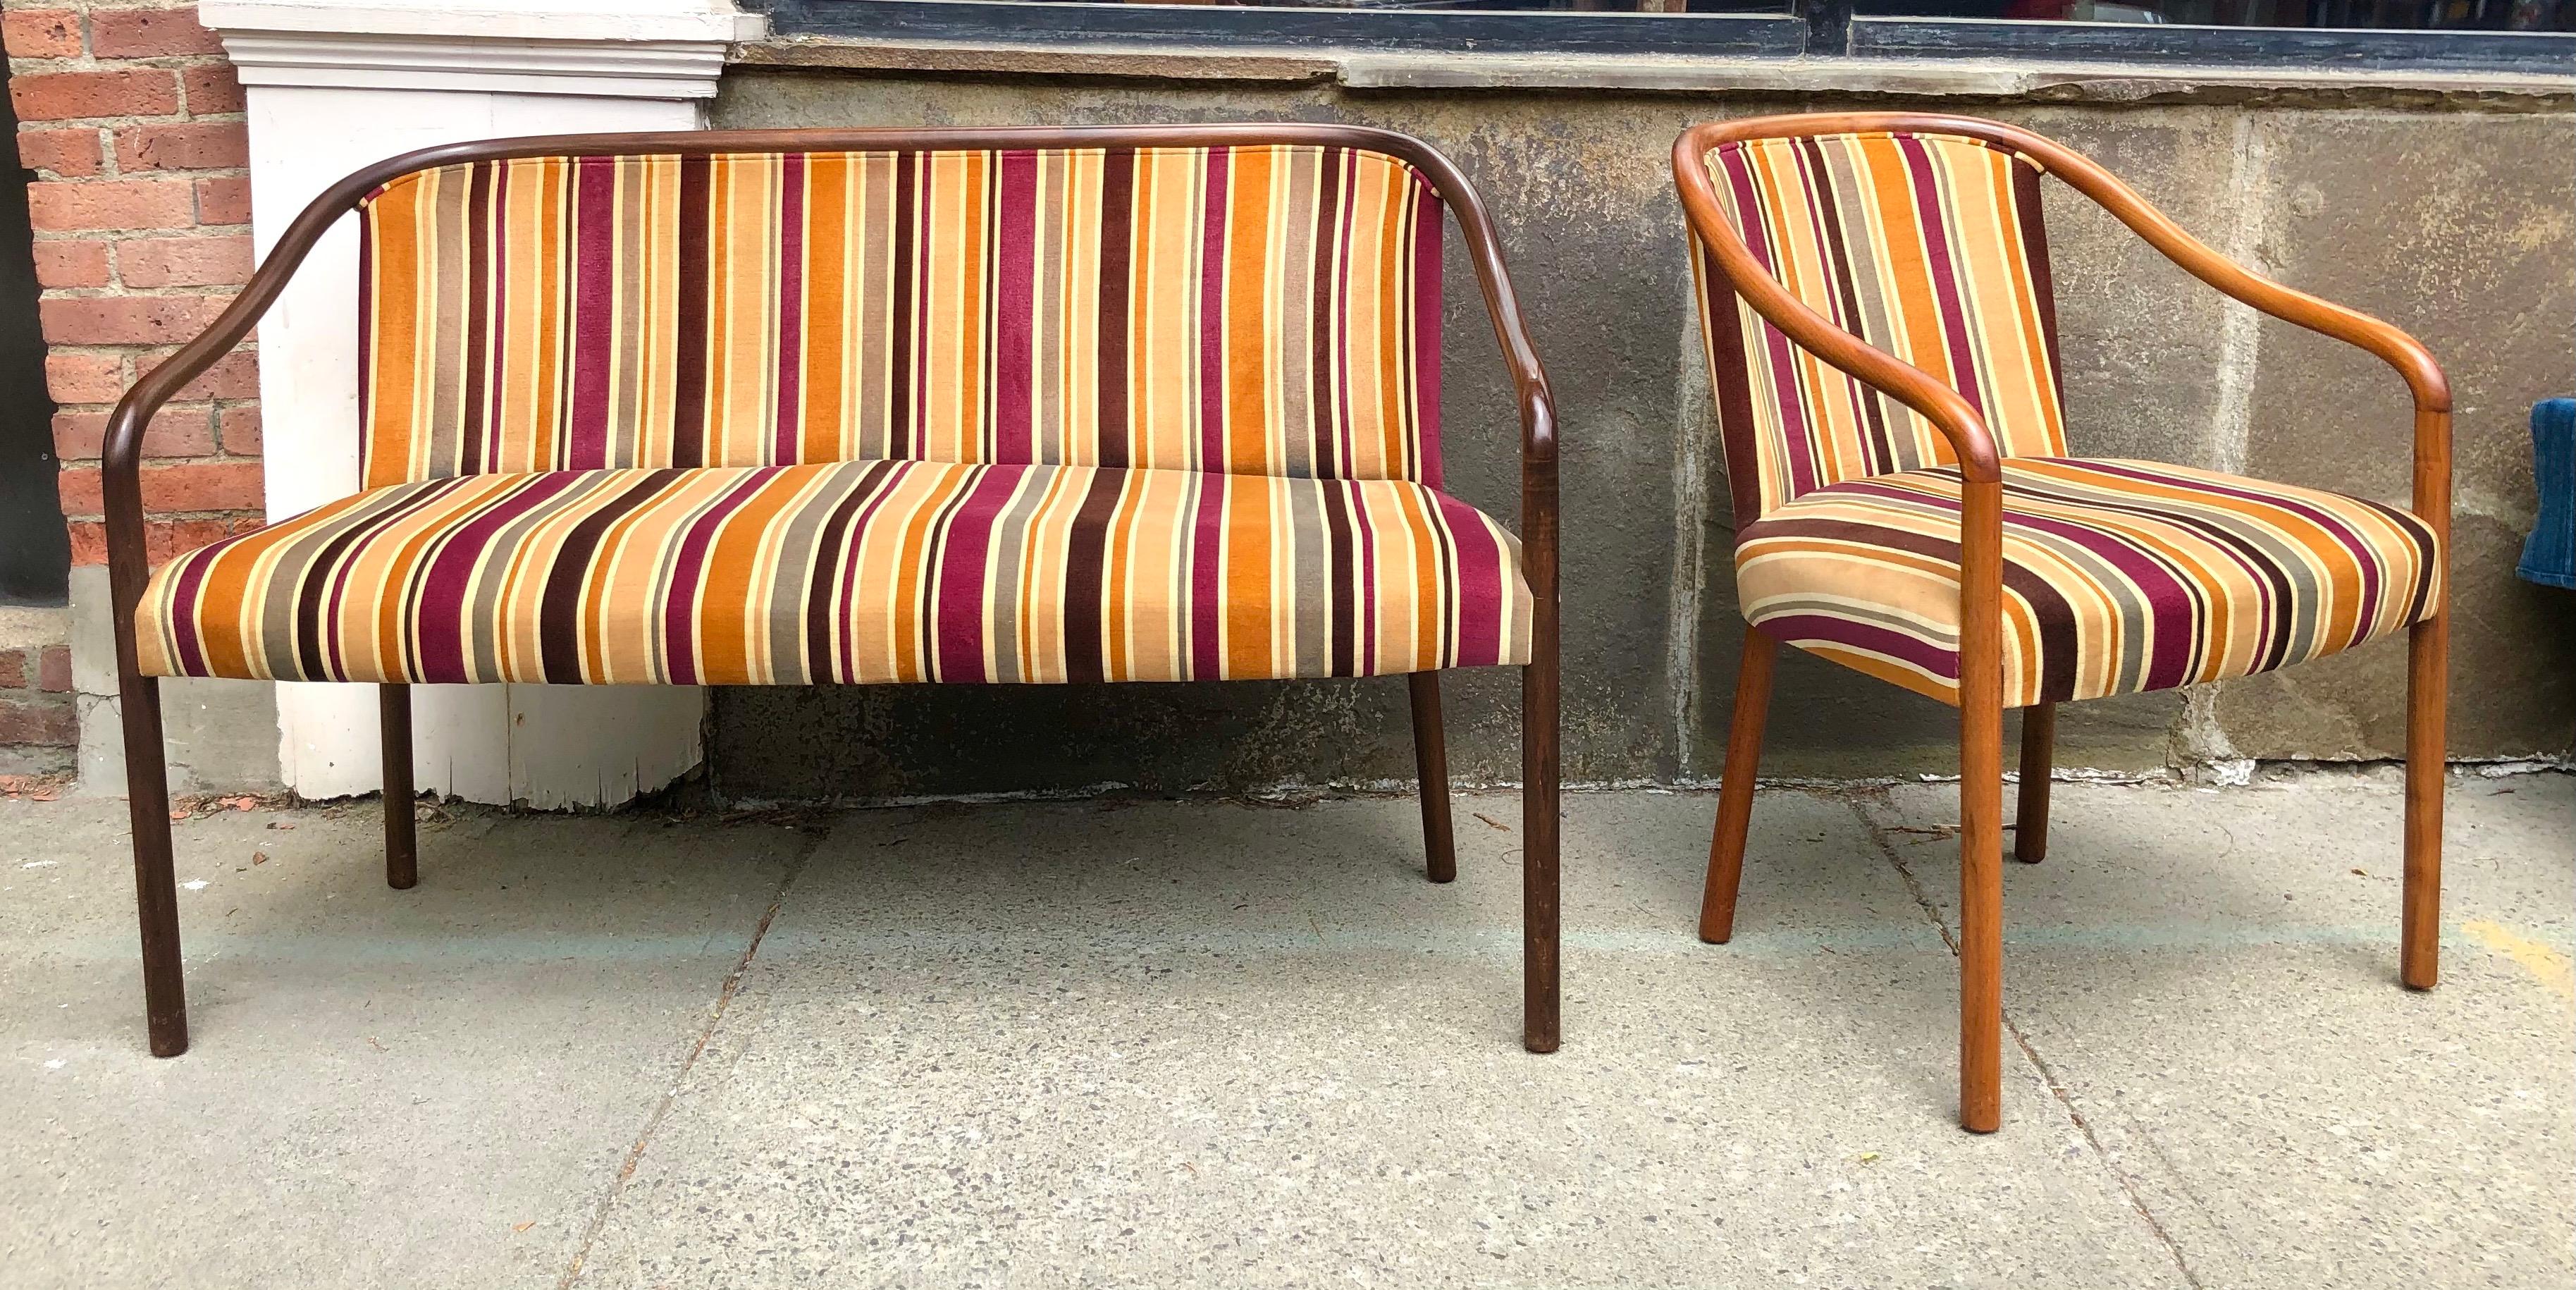 Bent ash frame with remarkably clean original mod striped cotton velvet upholstery. The chair frame is in a lighter stain wood but otherwise matches. Chair is 23